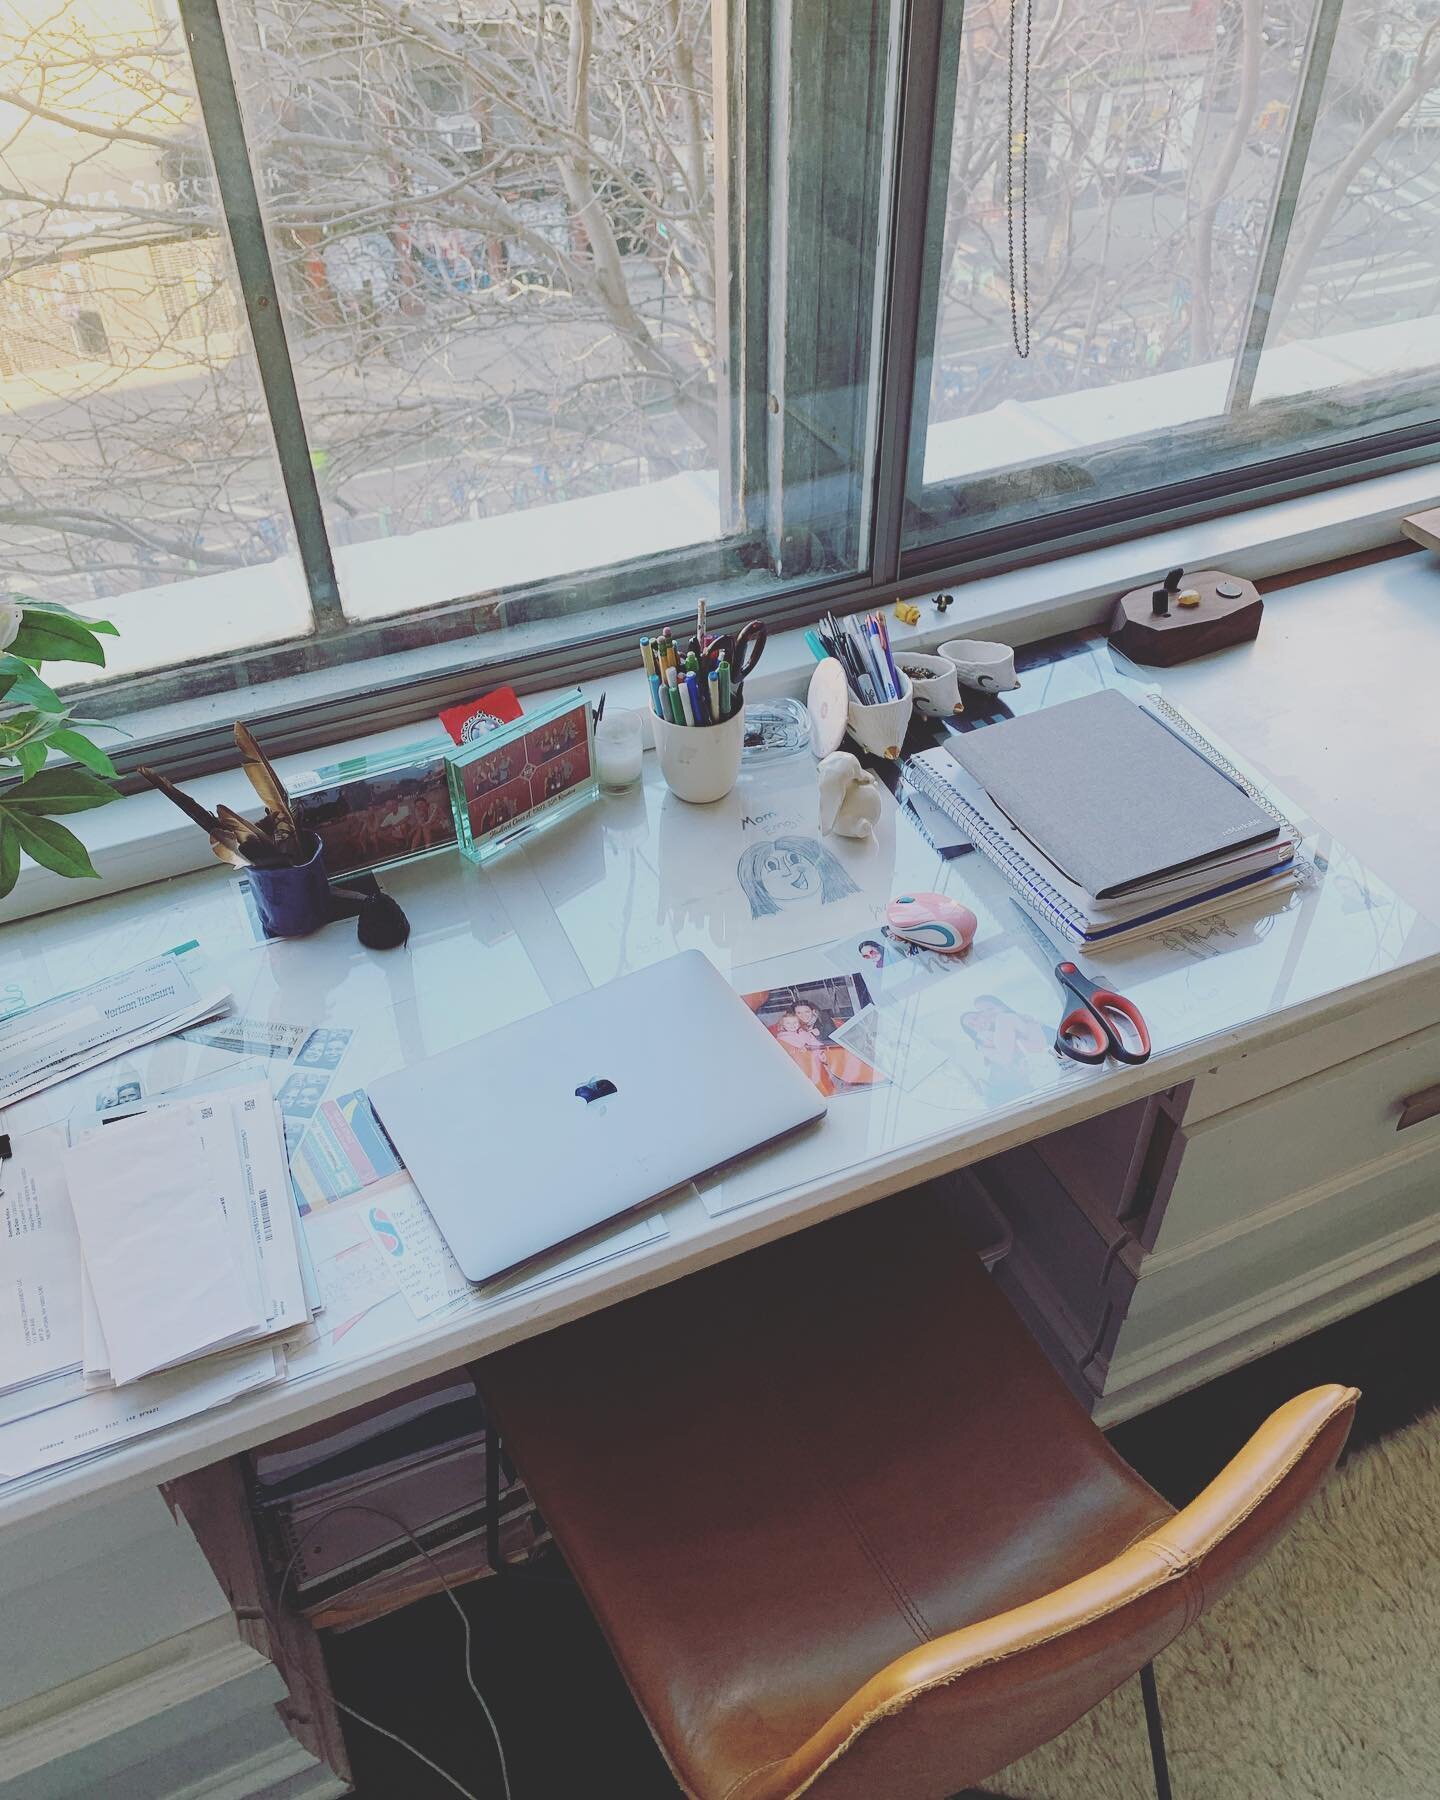 New Year, clean desk! Though, tbh, I will probably write at the dining room table&mdash;closer to the cookies.